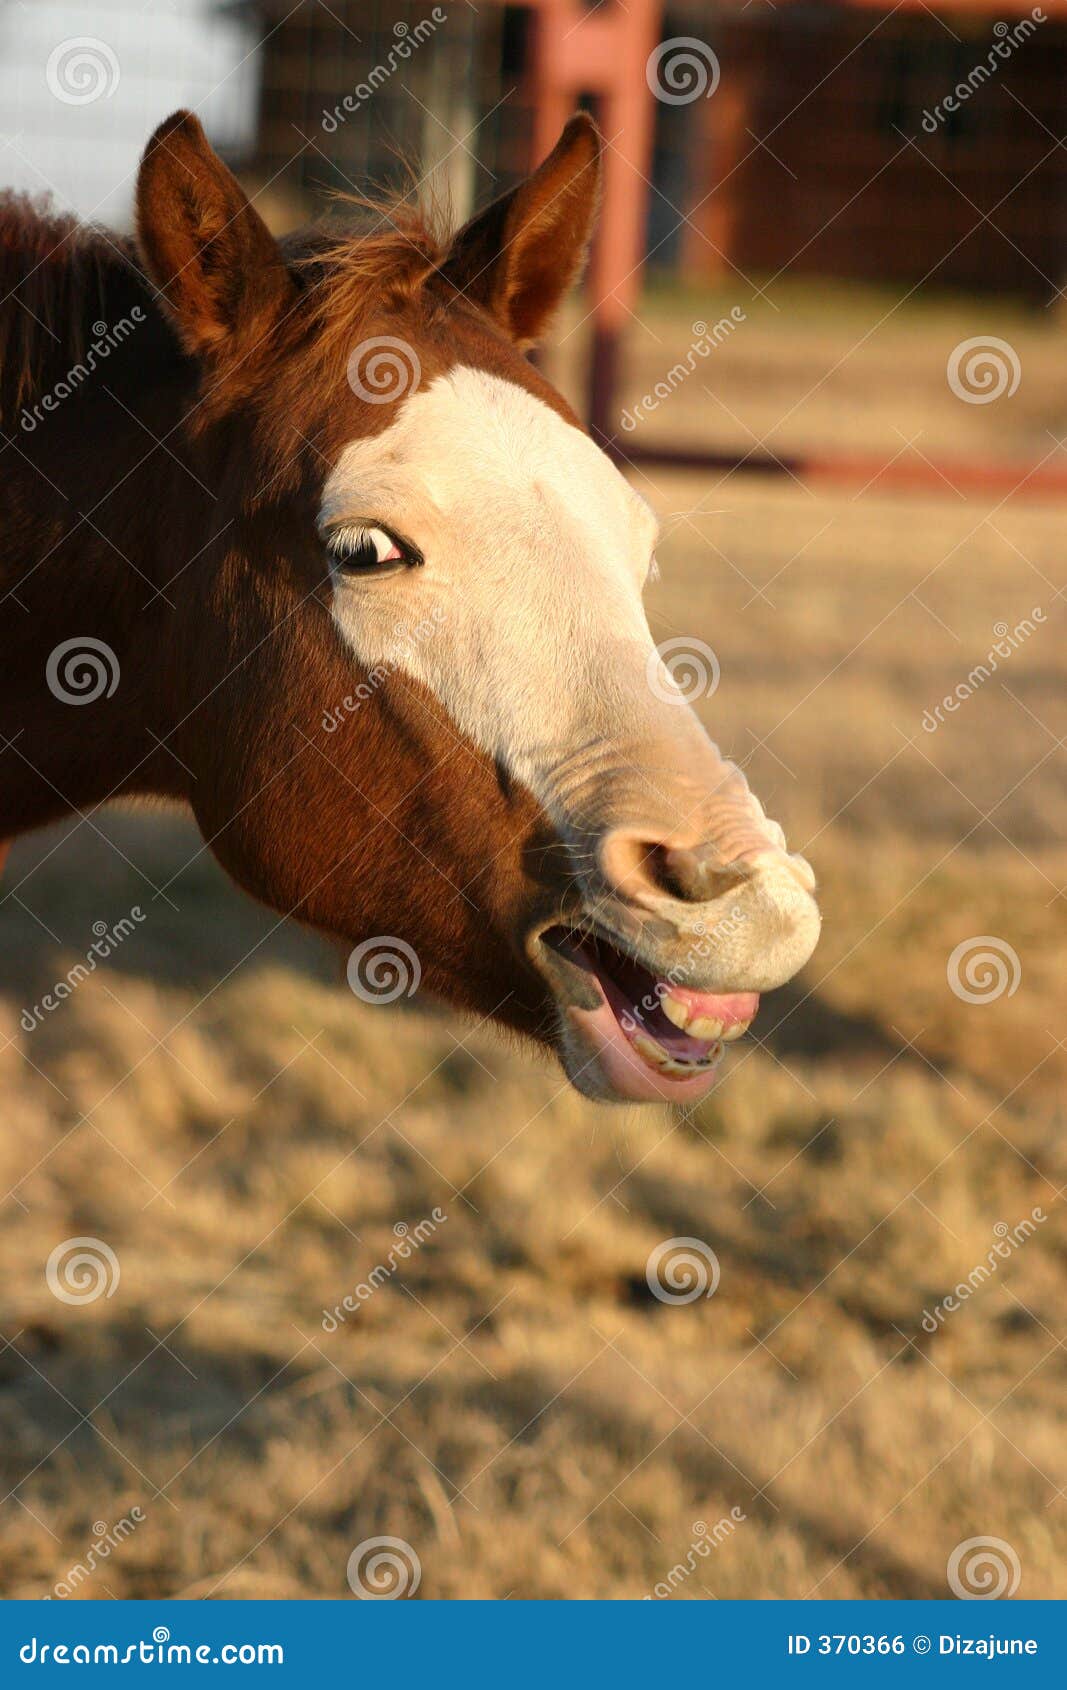 Smiling Horse Stock Photos, Images and Backgrounds for Free Download